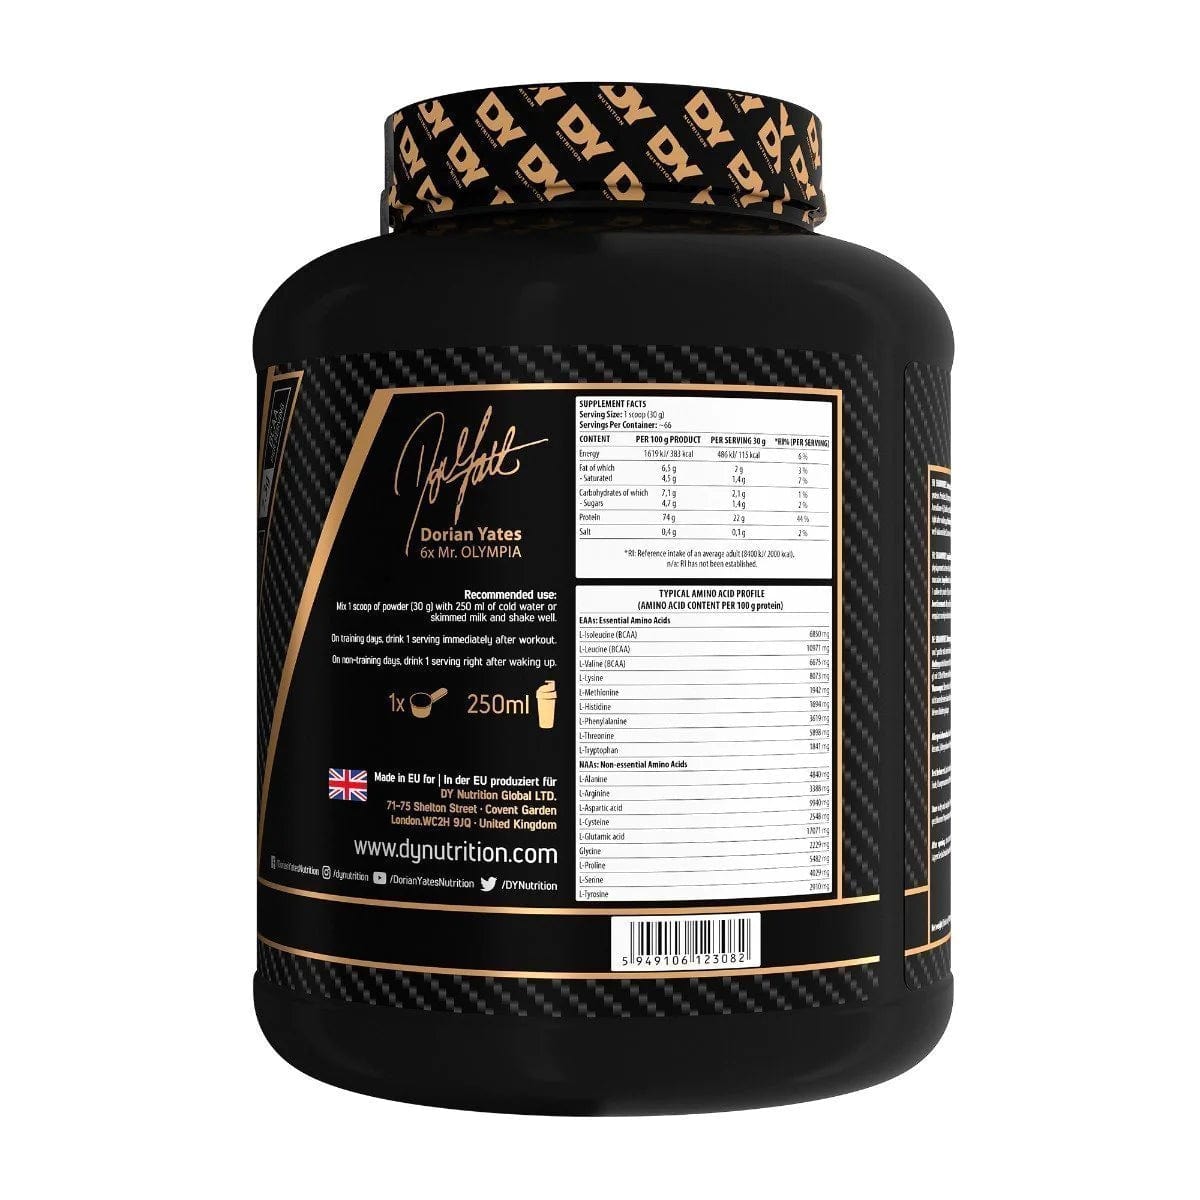 DY NutritionShadowhey ConcentrateWhey Protein ConcentrateRED SUPPS